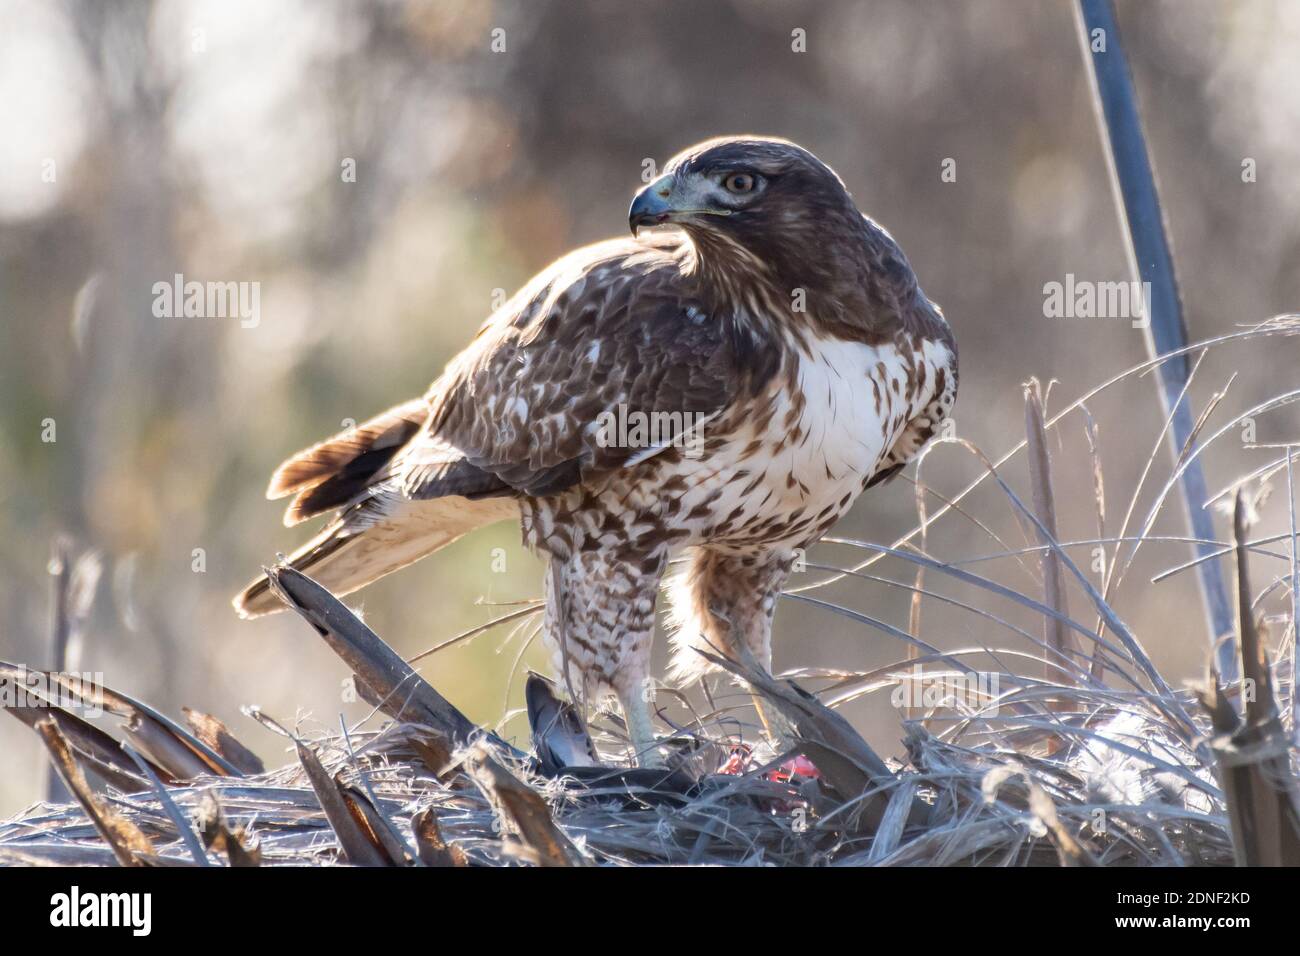 Majestic Coopers Hawk stands over freshy hunted prey and ready to protect his meal. Stock Photo